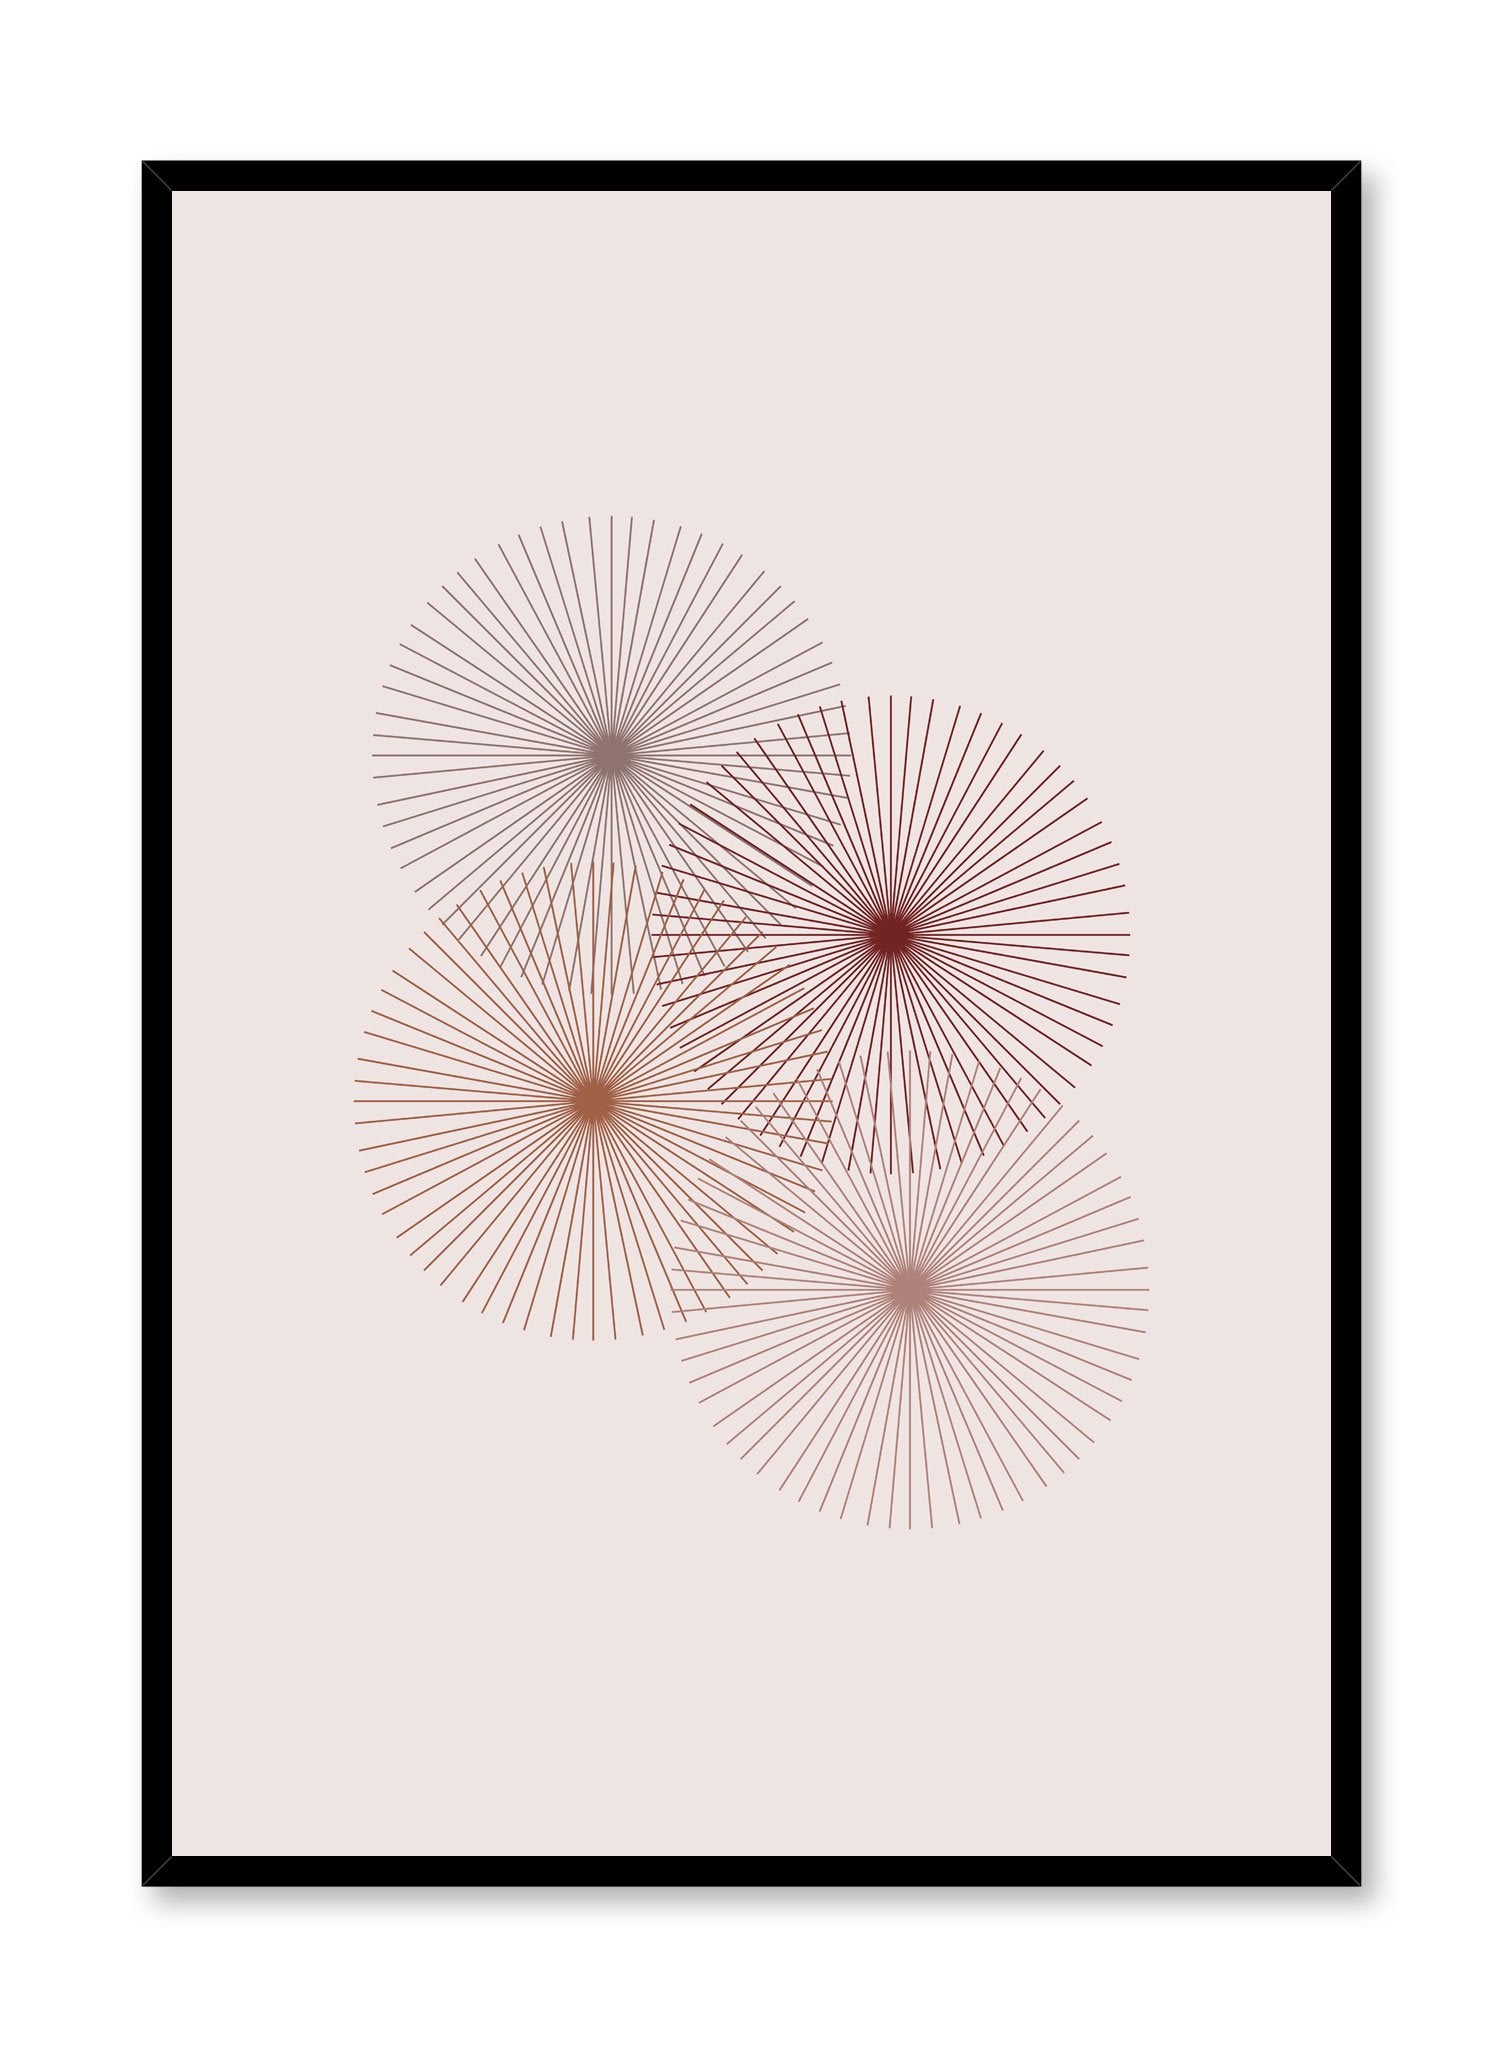 Minimalist design poster by Opposite Wall with Geometric Bouquet abstract graphic design of three floral circles